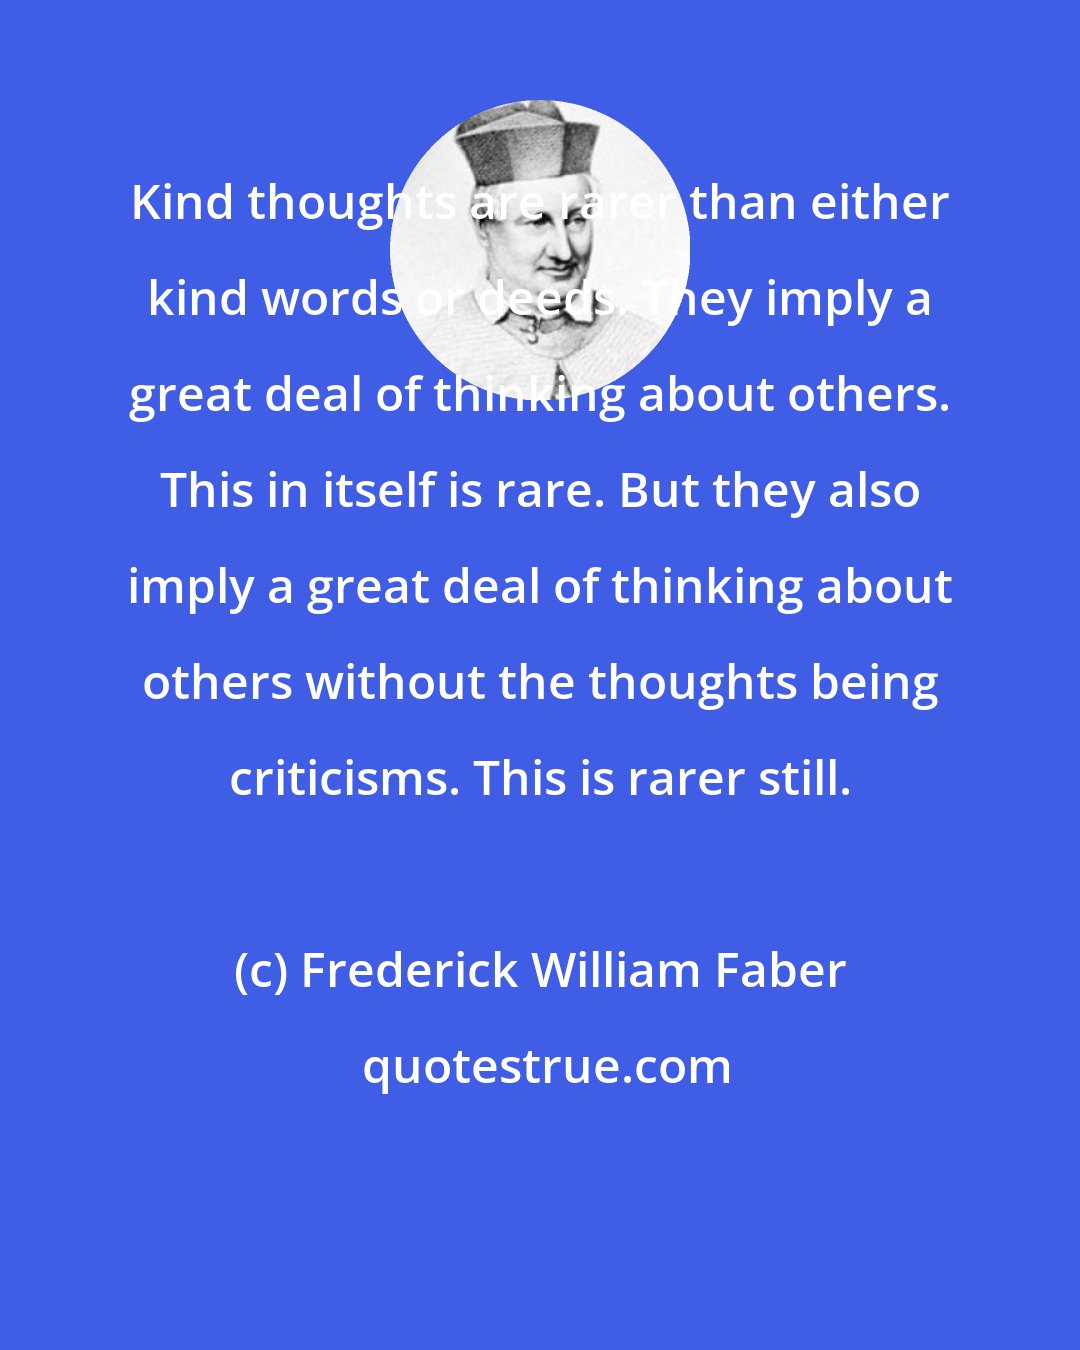 Frederick William Faber: Kind thoughts are rarer than either kind words or deeds. They imply a great deal of thinking about others. This in itself is rare. But they also imply a great deal of thinking about others without the thoughts being criticisms. This is rarer still.